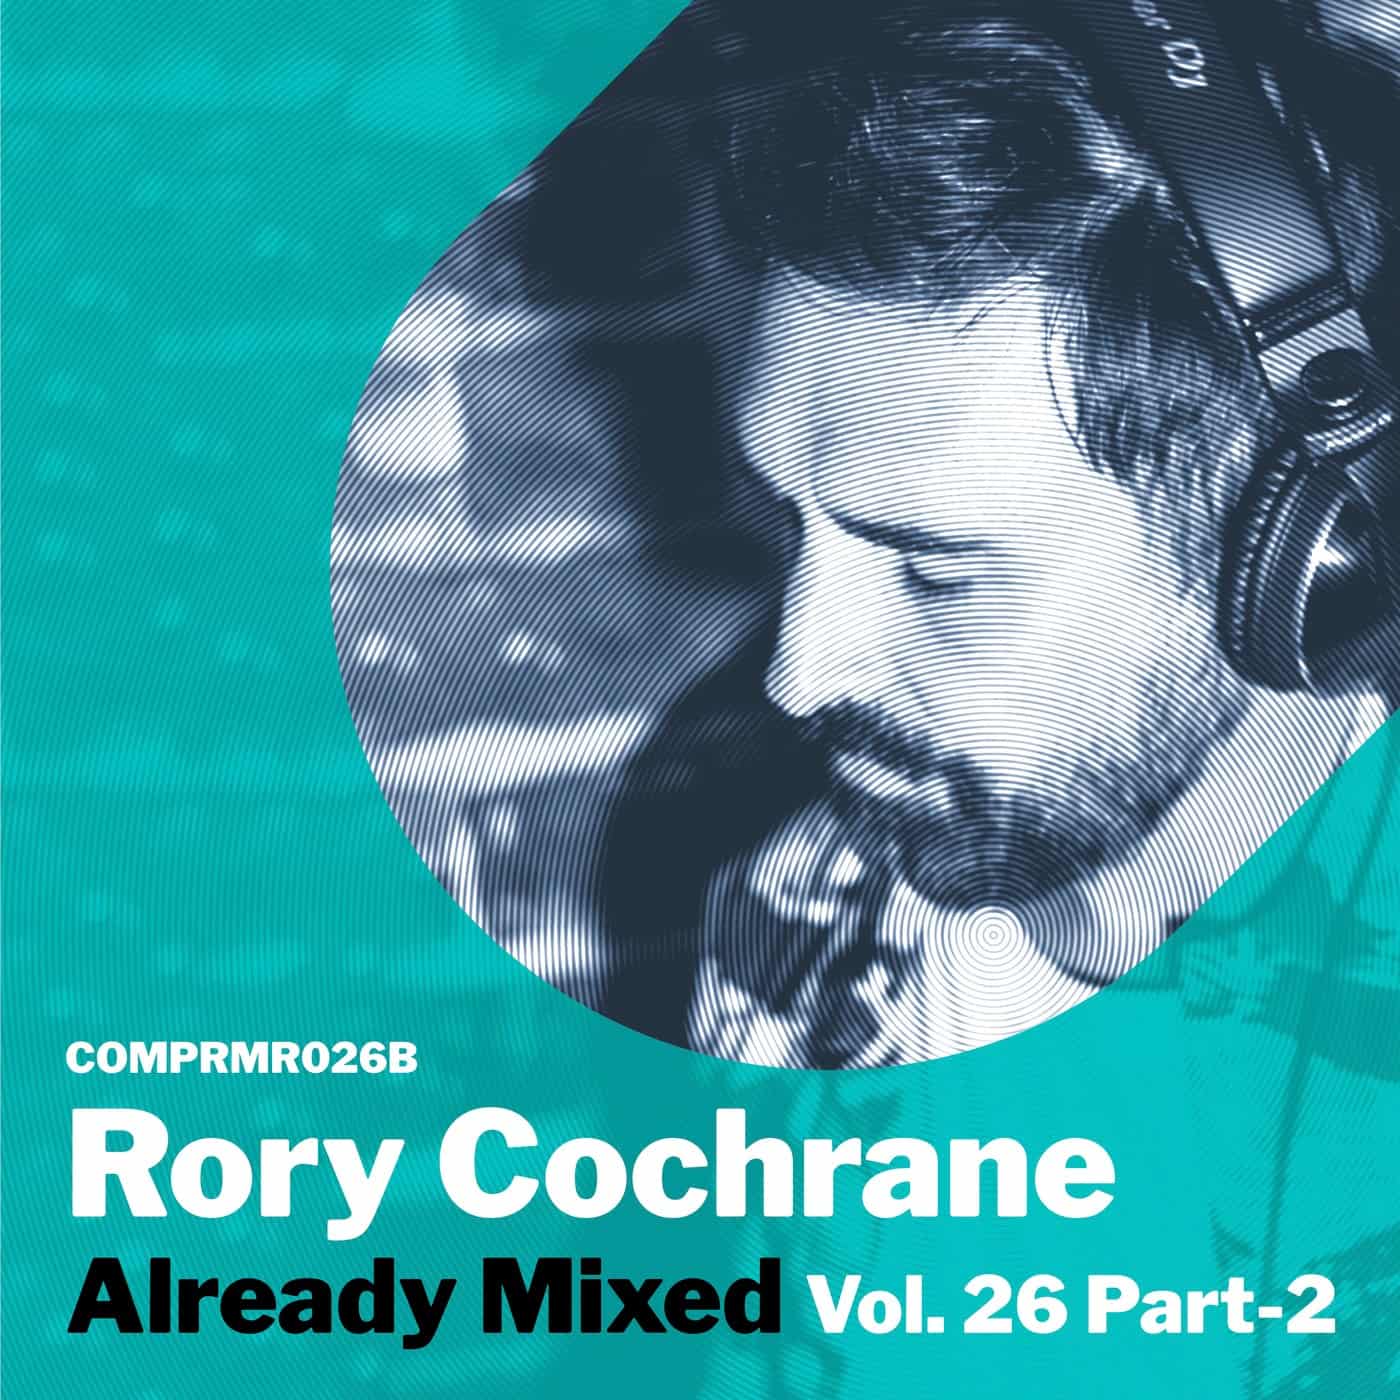 image cover: VA - Already Mixed Vol. 26 - Pt. 2 (Compiled & Mixed By Rory Cochrane) / COMPRMR026B